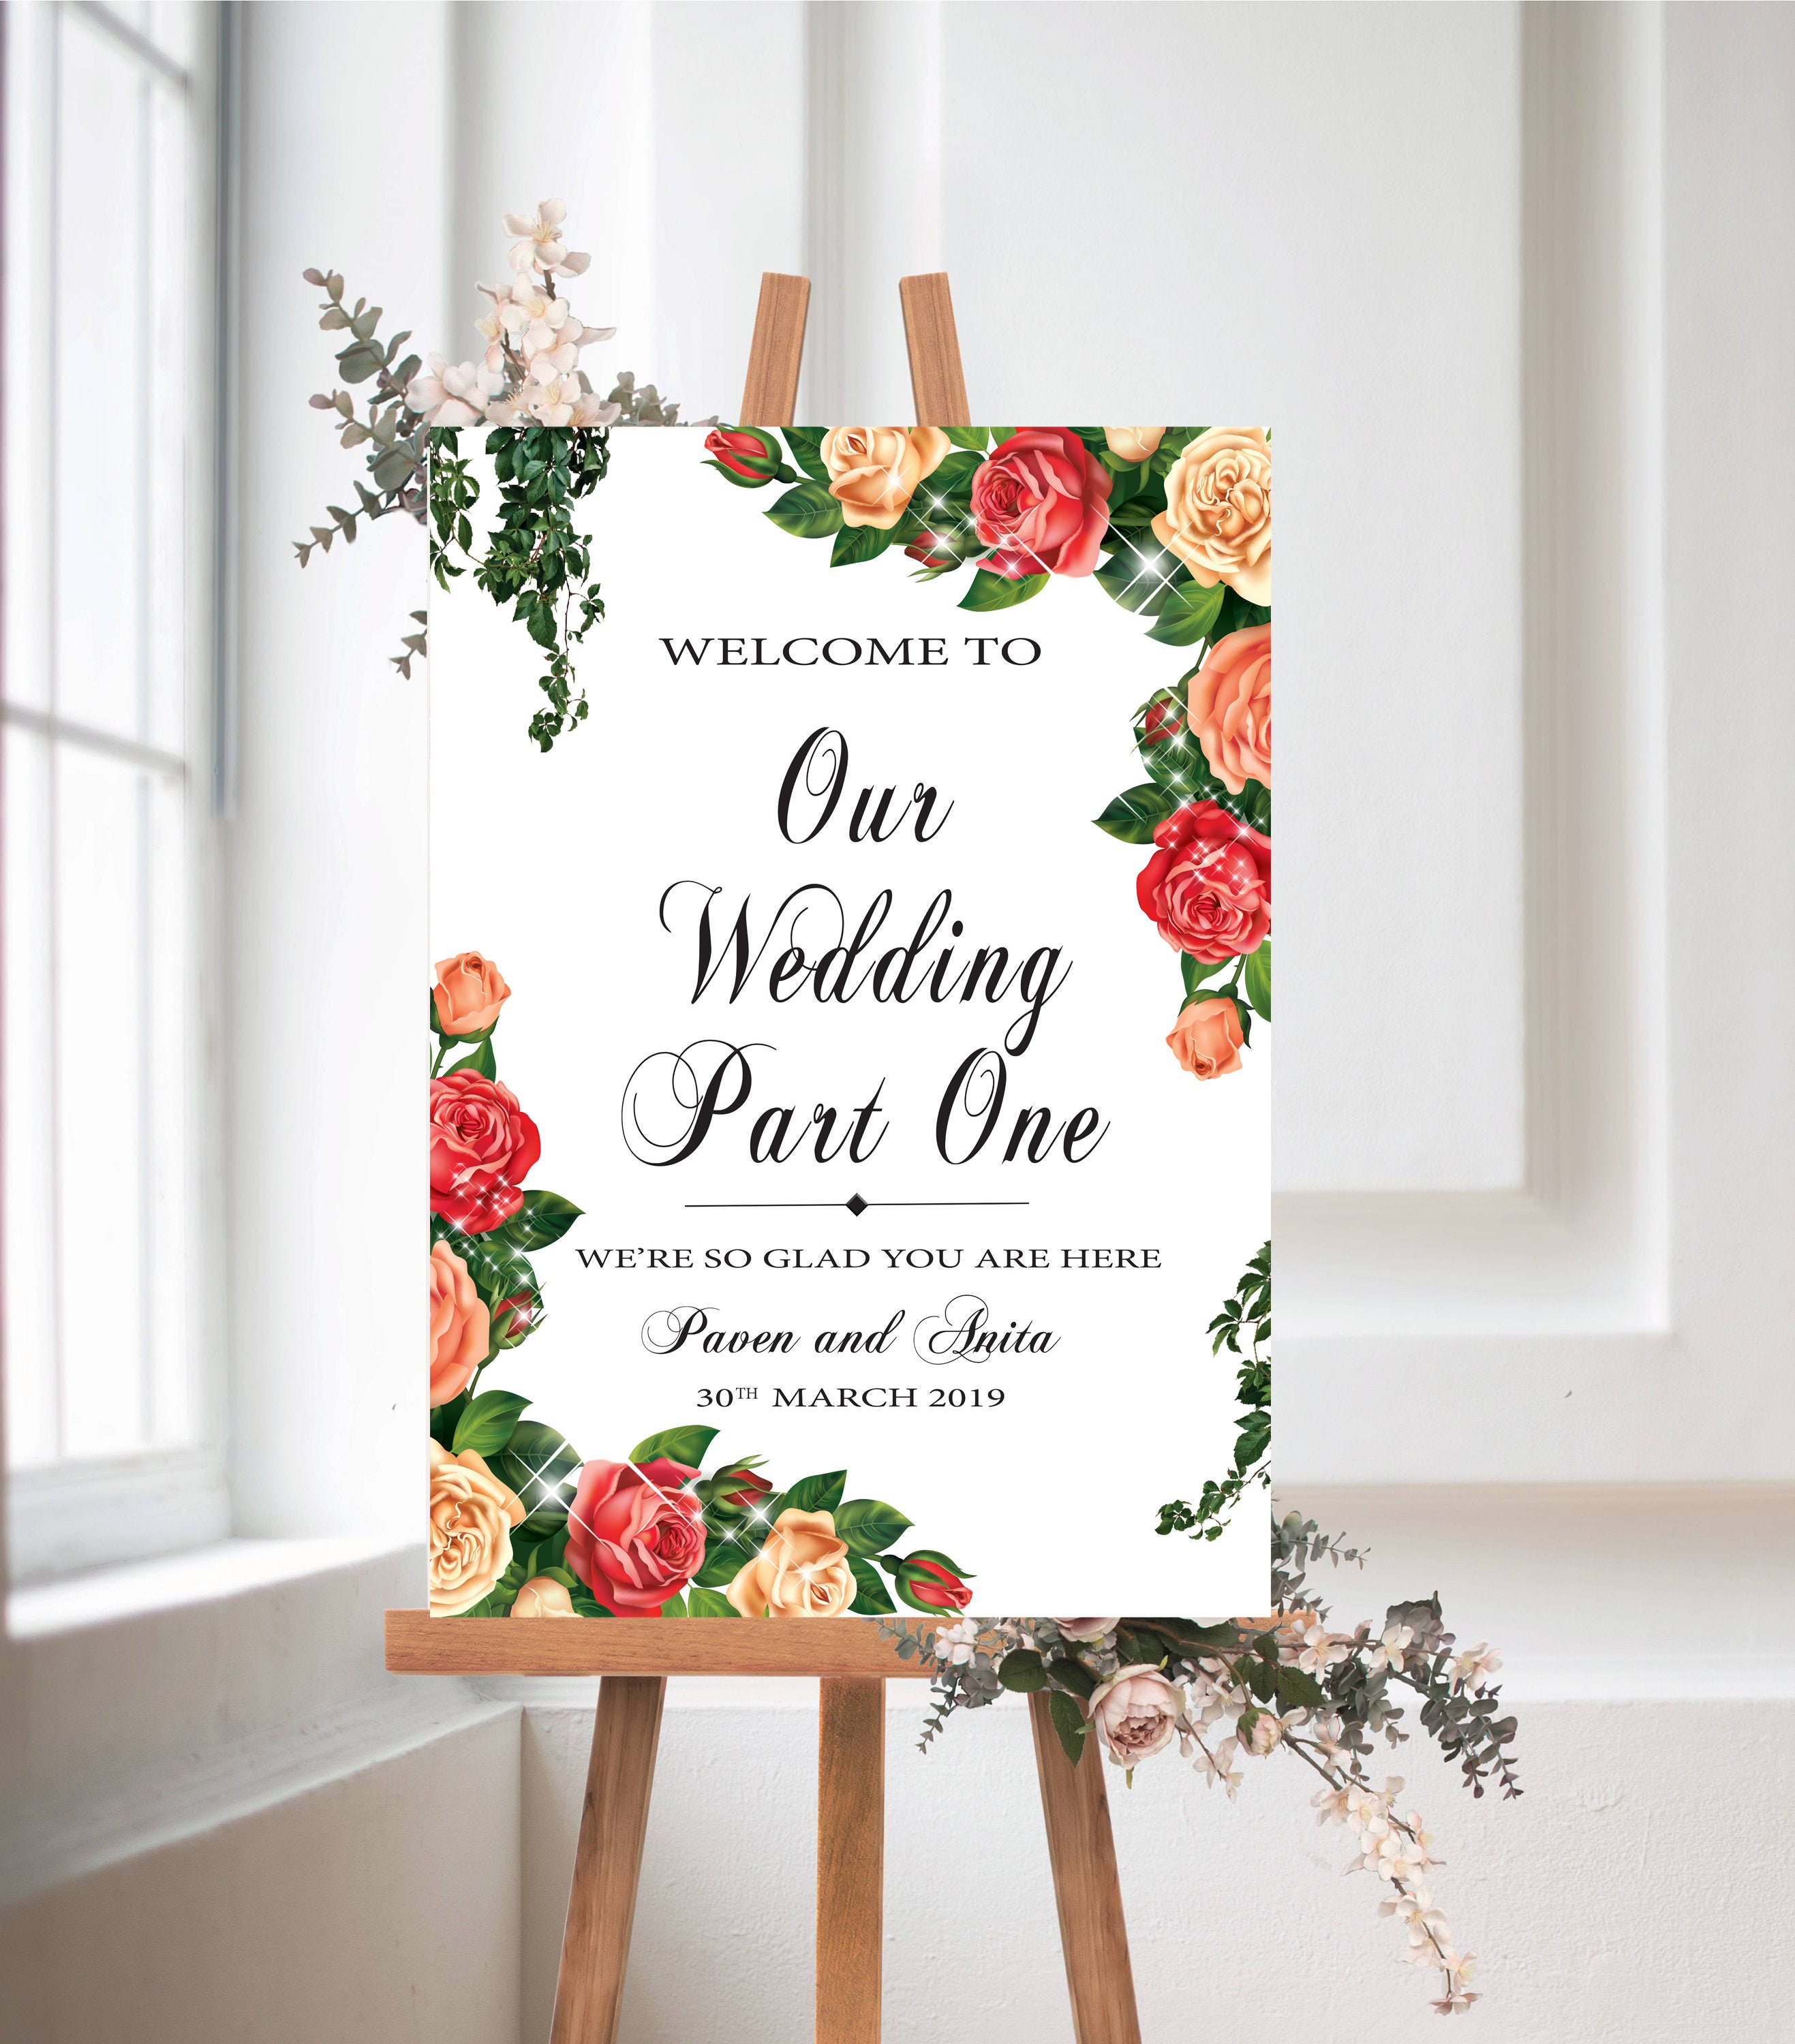 wedding-welcome-board-sign-a1-large-size-beautiful-elegant-etsy